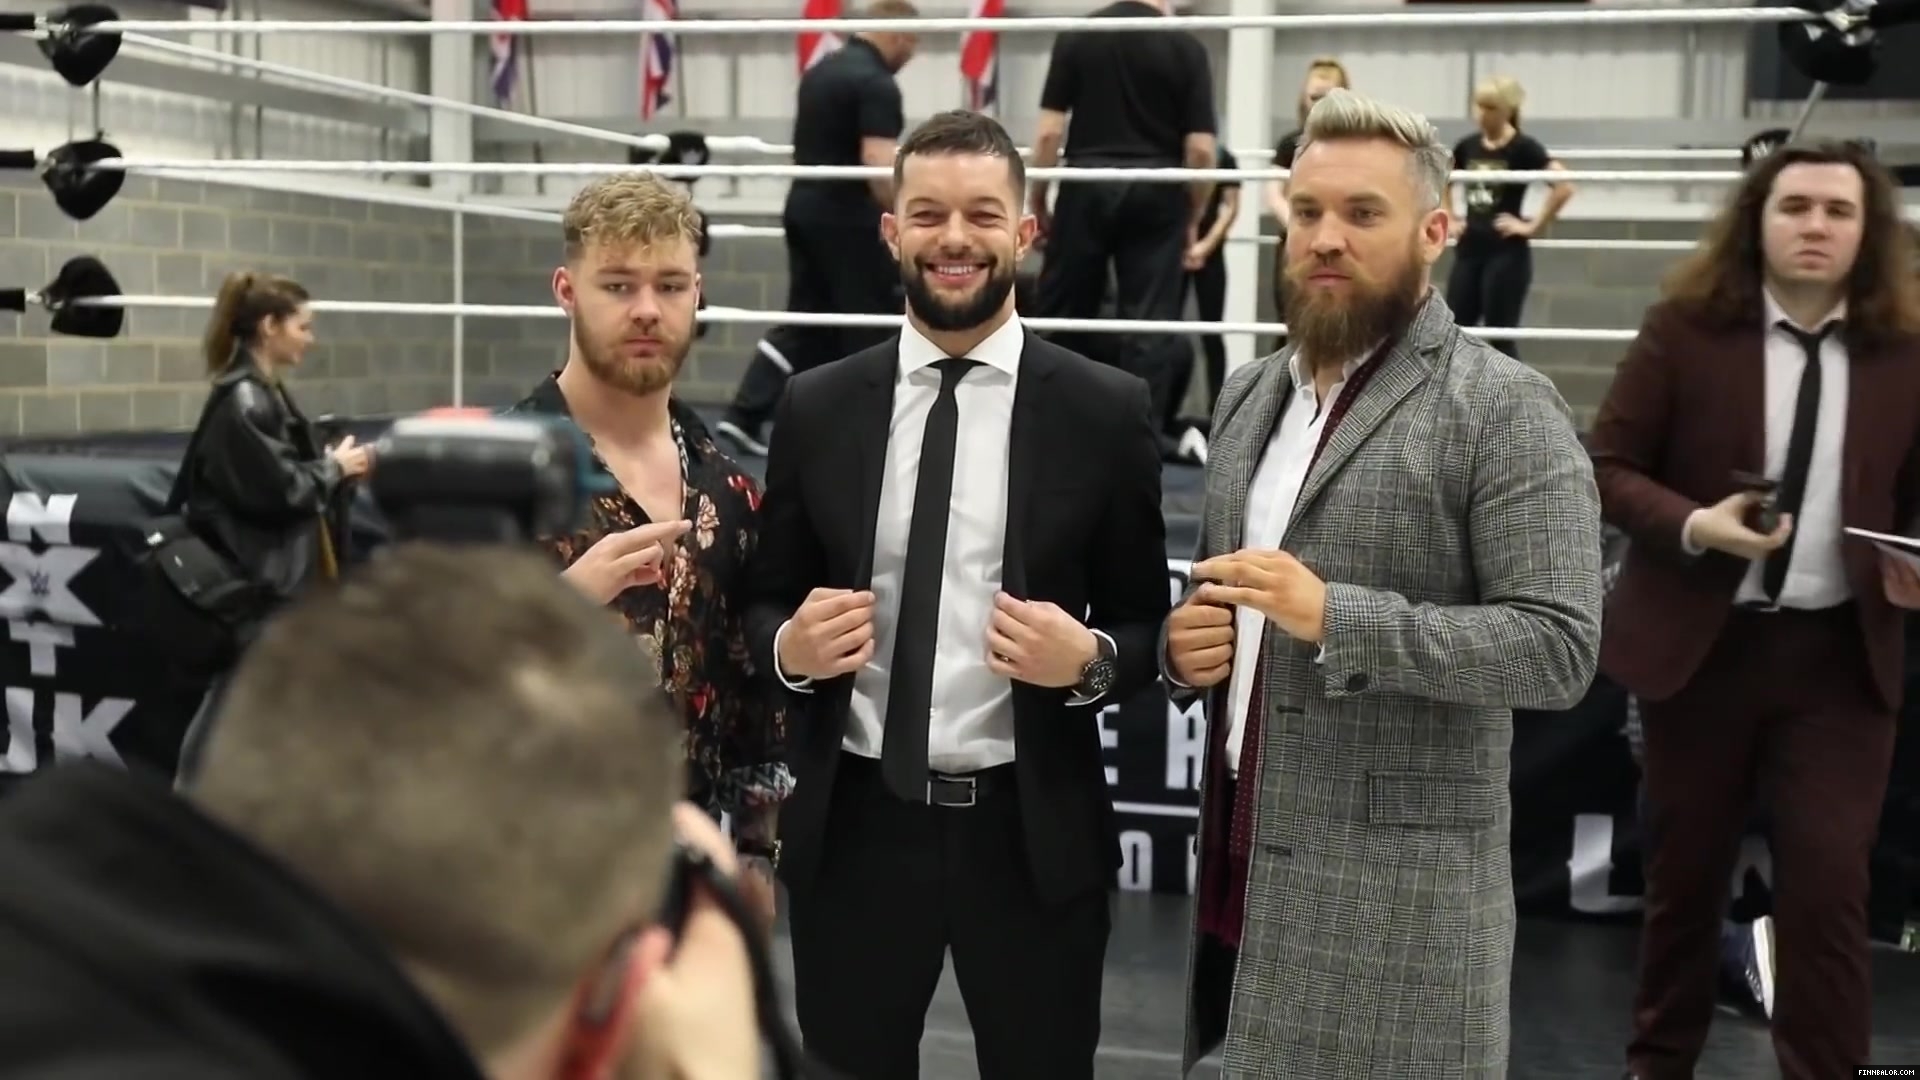 WWE_Superstar_FINN_BALOR_joins_MOUSTACHE_MOUNTAIN_at_the_opening_of_the_NXT_UK_PC_043.jpg